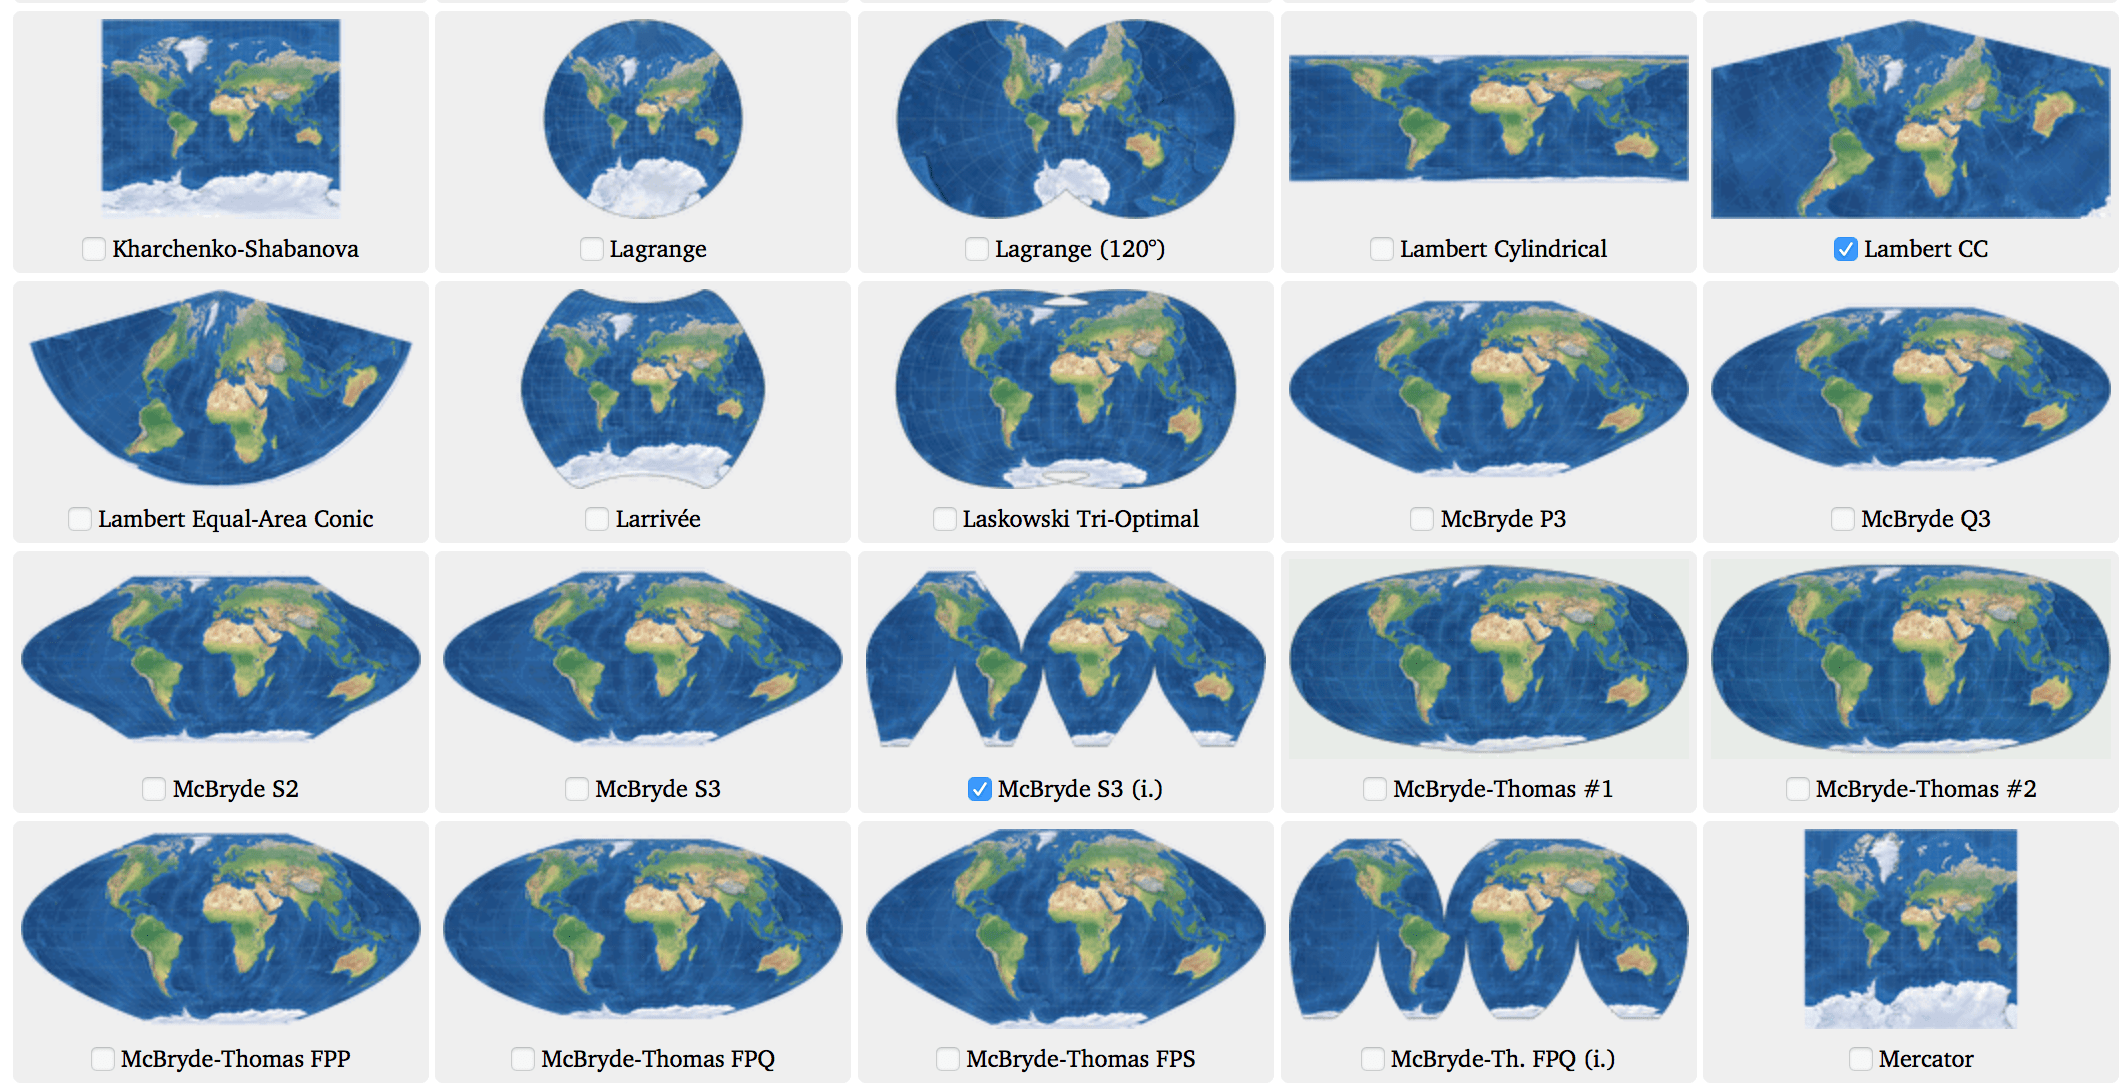 Erinevad projektsioonid (allikas: [Compare Map Projections](https://map-projections.net/imglist.php))